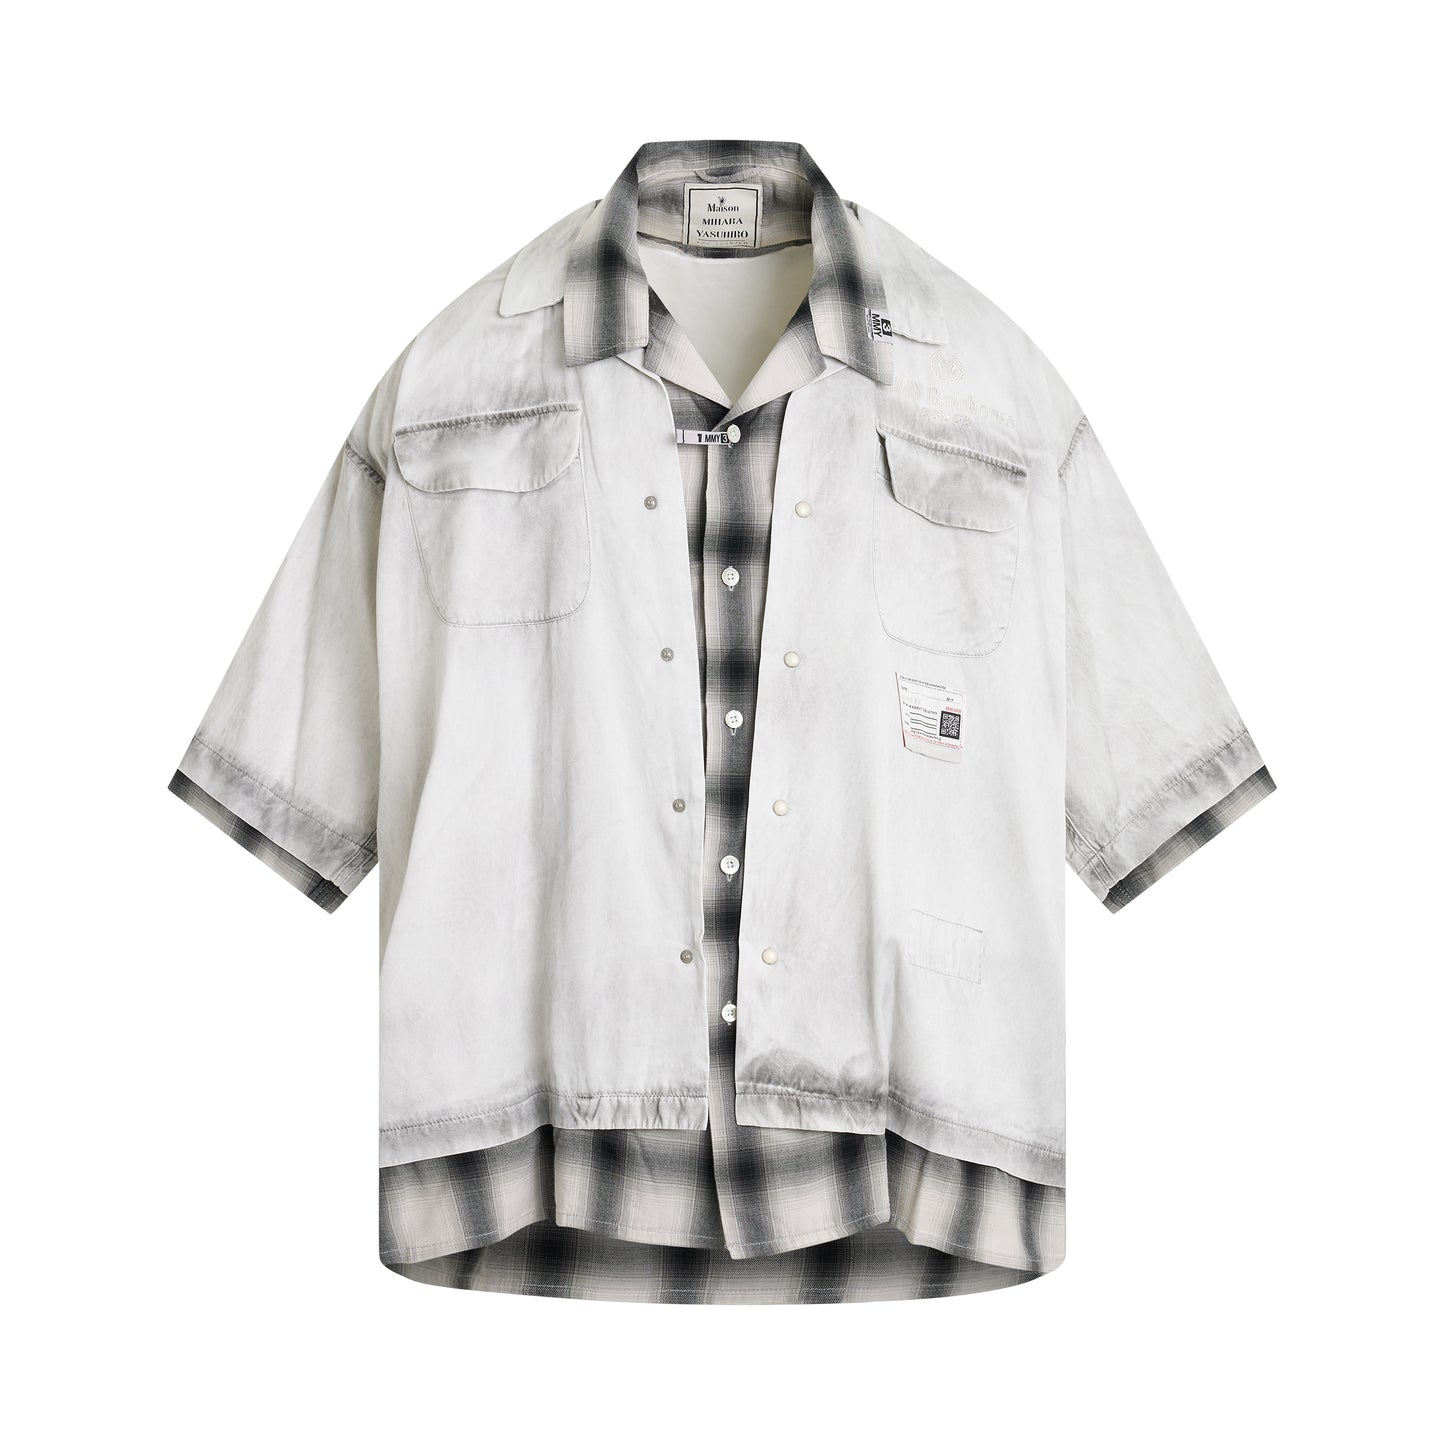 Rc Twill Double Layered Short-Sleeve Shirt in Light Grey